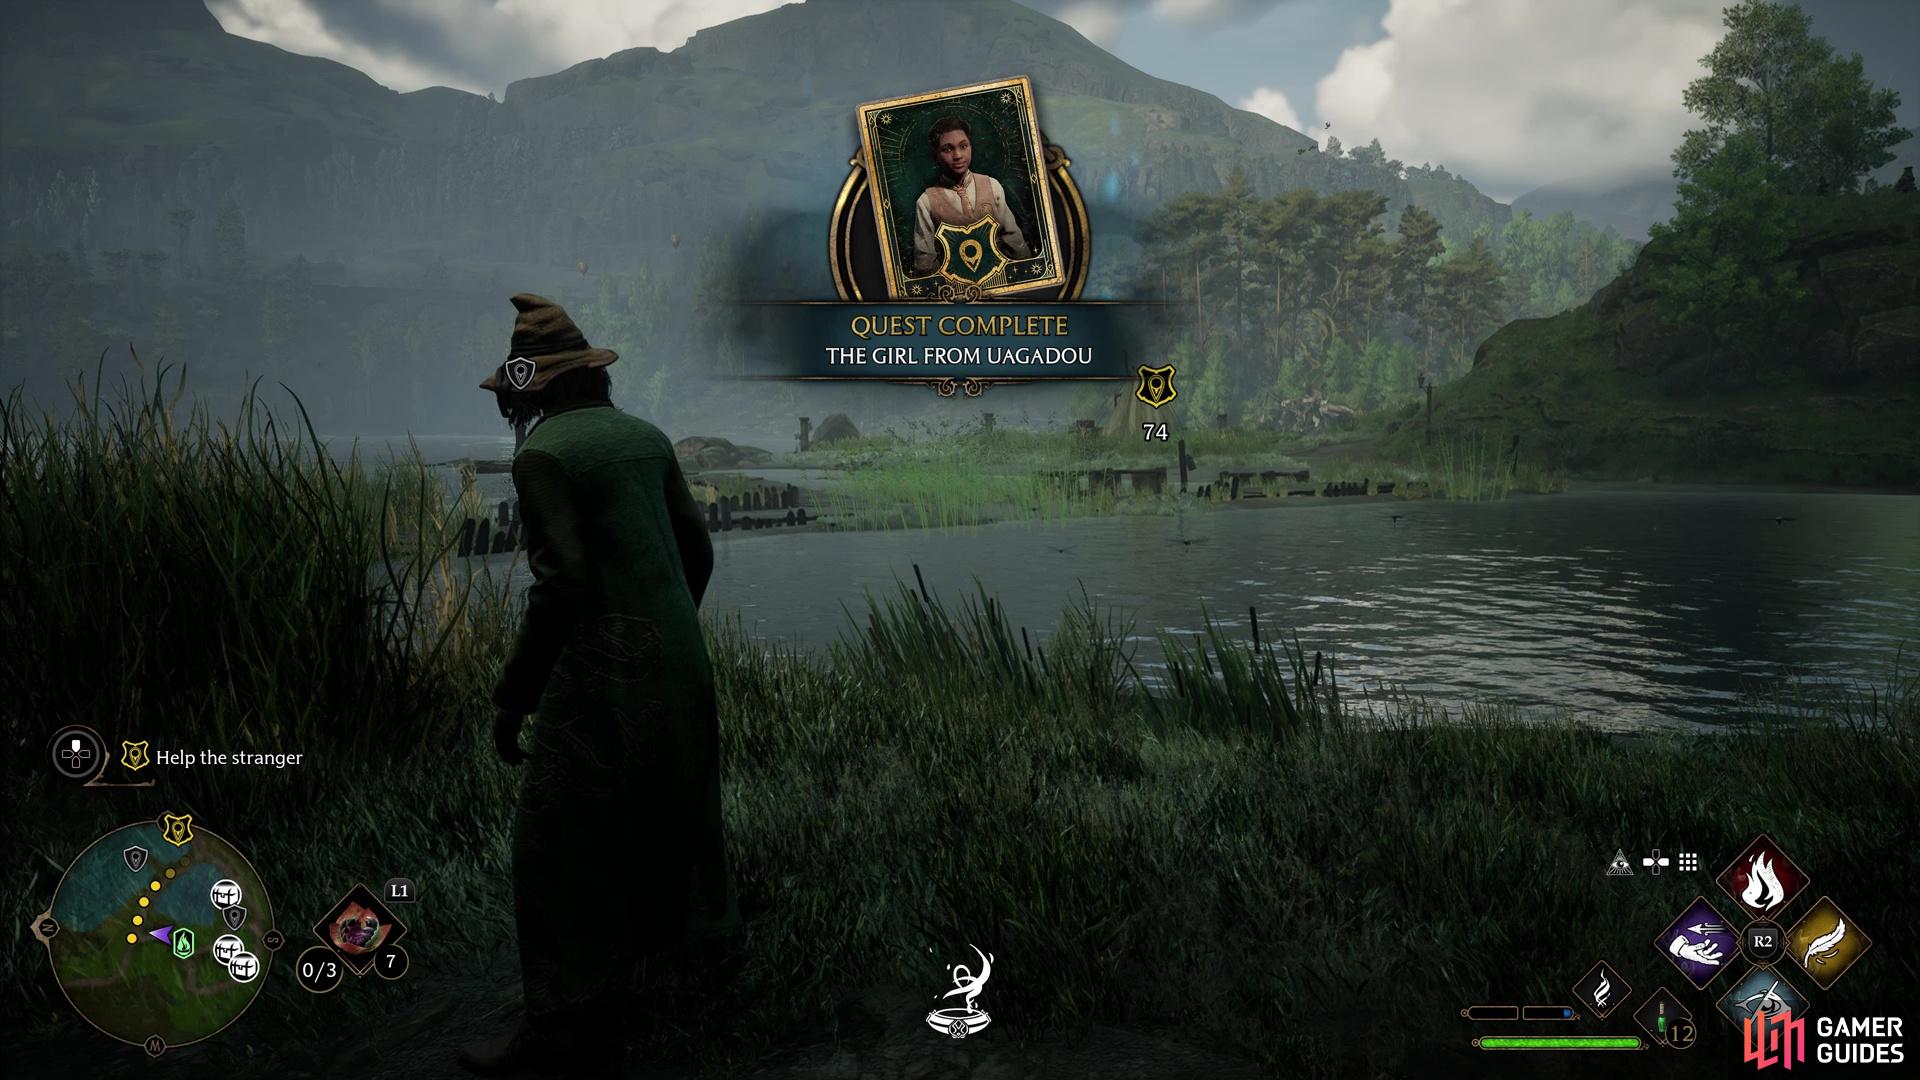 No one expects the Hogwarts Inquisition. The completion of this quest quickly leads to the Merlin Trials quest.